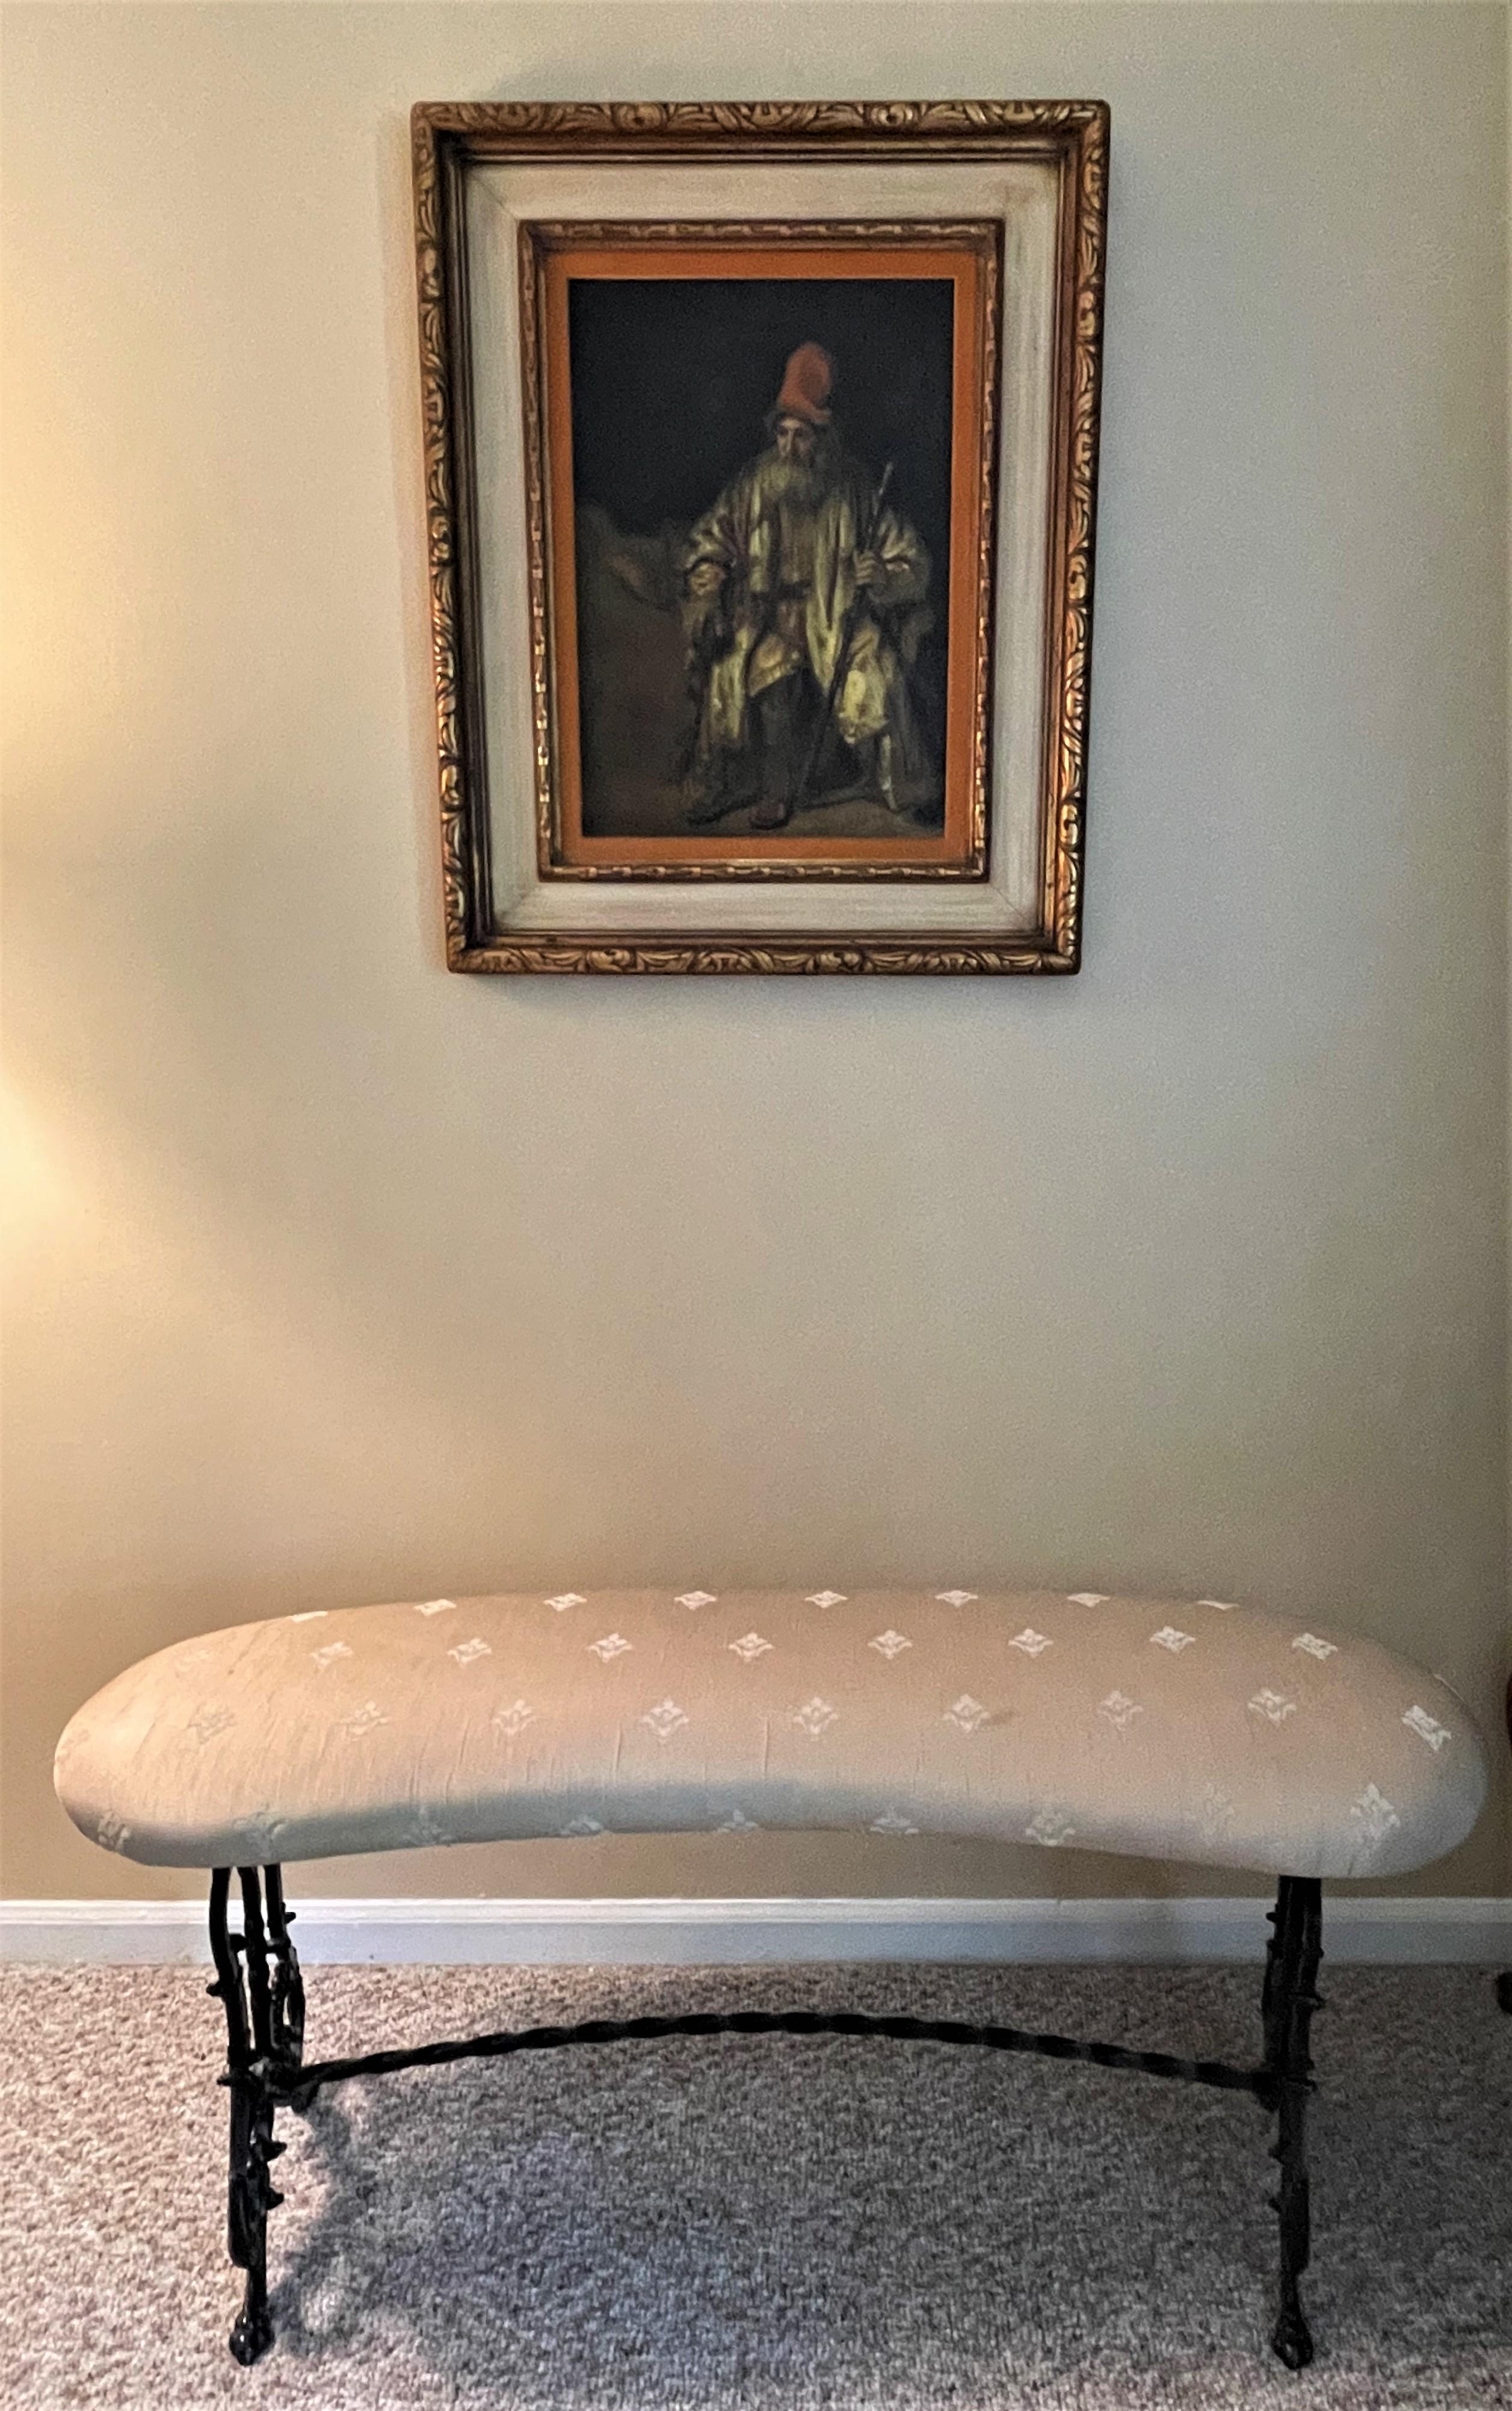 A chic accent piece for any room, foyer or hall. From the Roaring 20s, this black cast iron bench is a well-crafted example of the Gothic Revival style. It was beautifully reupholstered in a champagne-colored silk fabric. The light-color fabric set